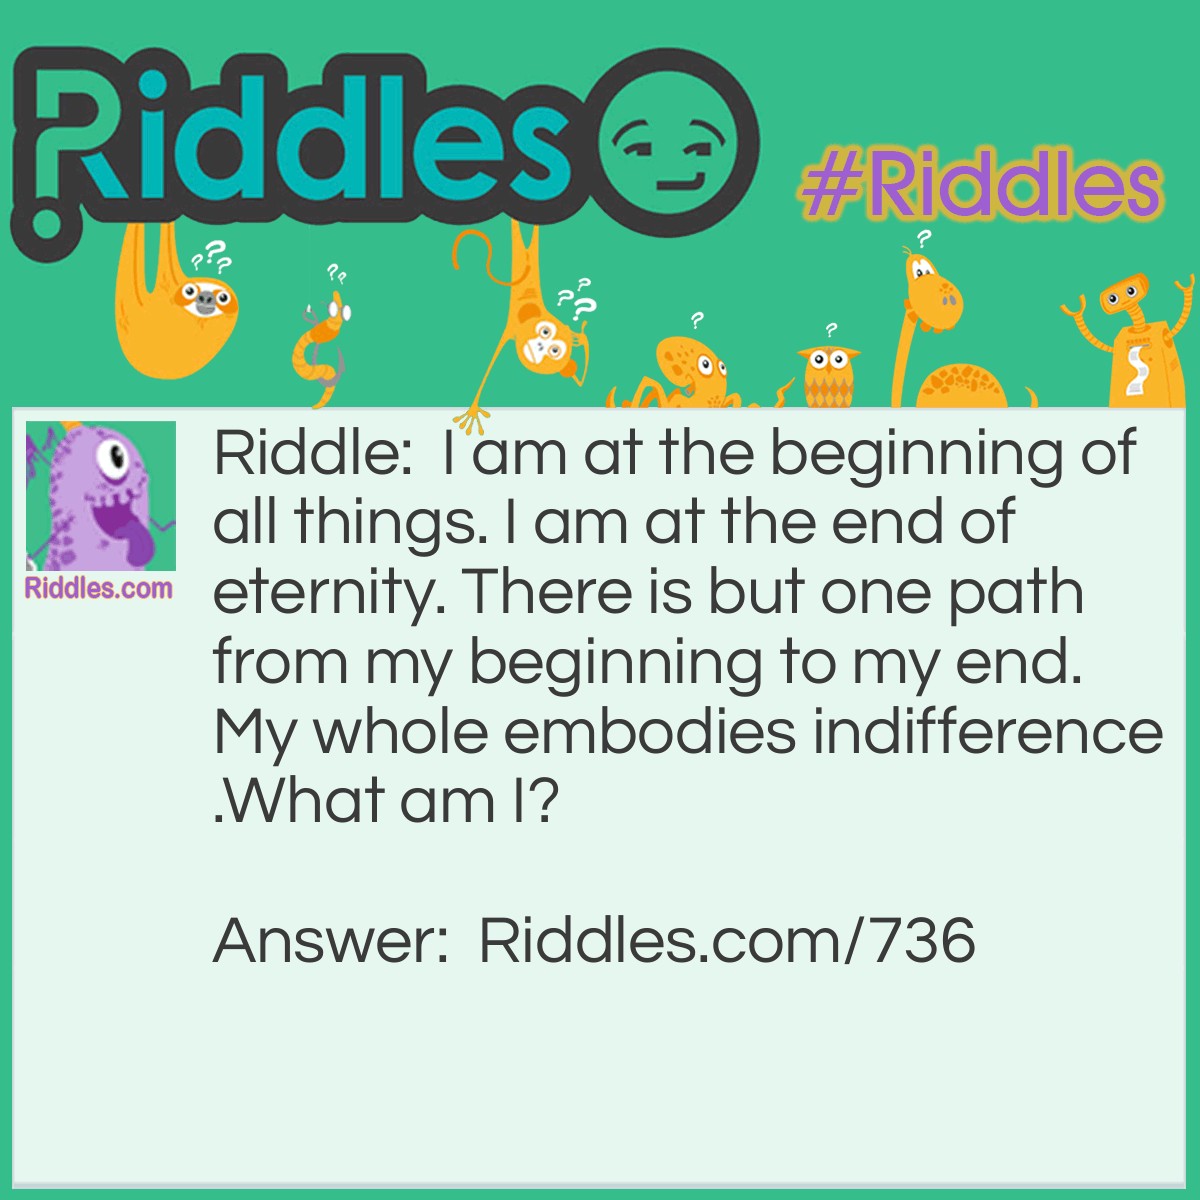 Riddle: I am at the beginning of all things. I am at the end of eternity. There is but one path from my beginning to my end. My whole embodies indifference.
What am I? Answer: I am Apathy!